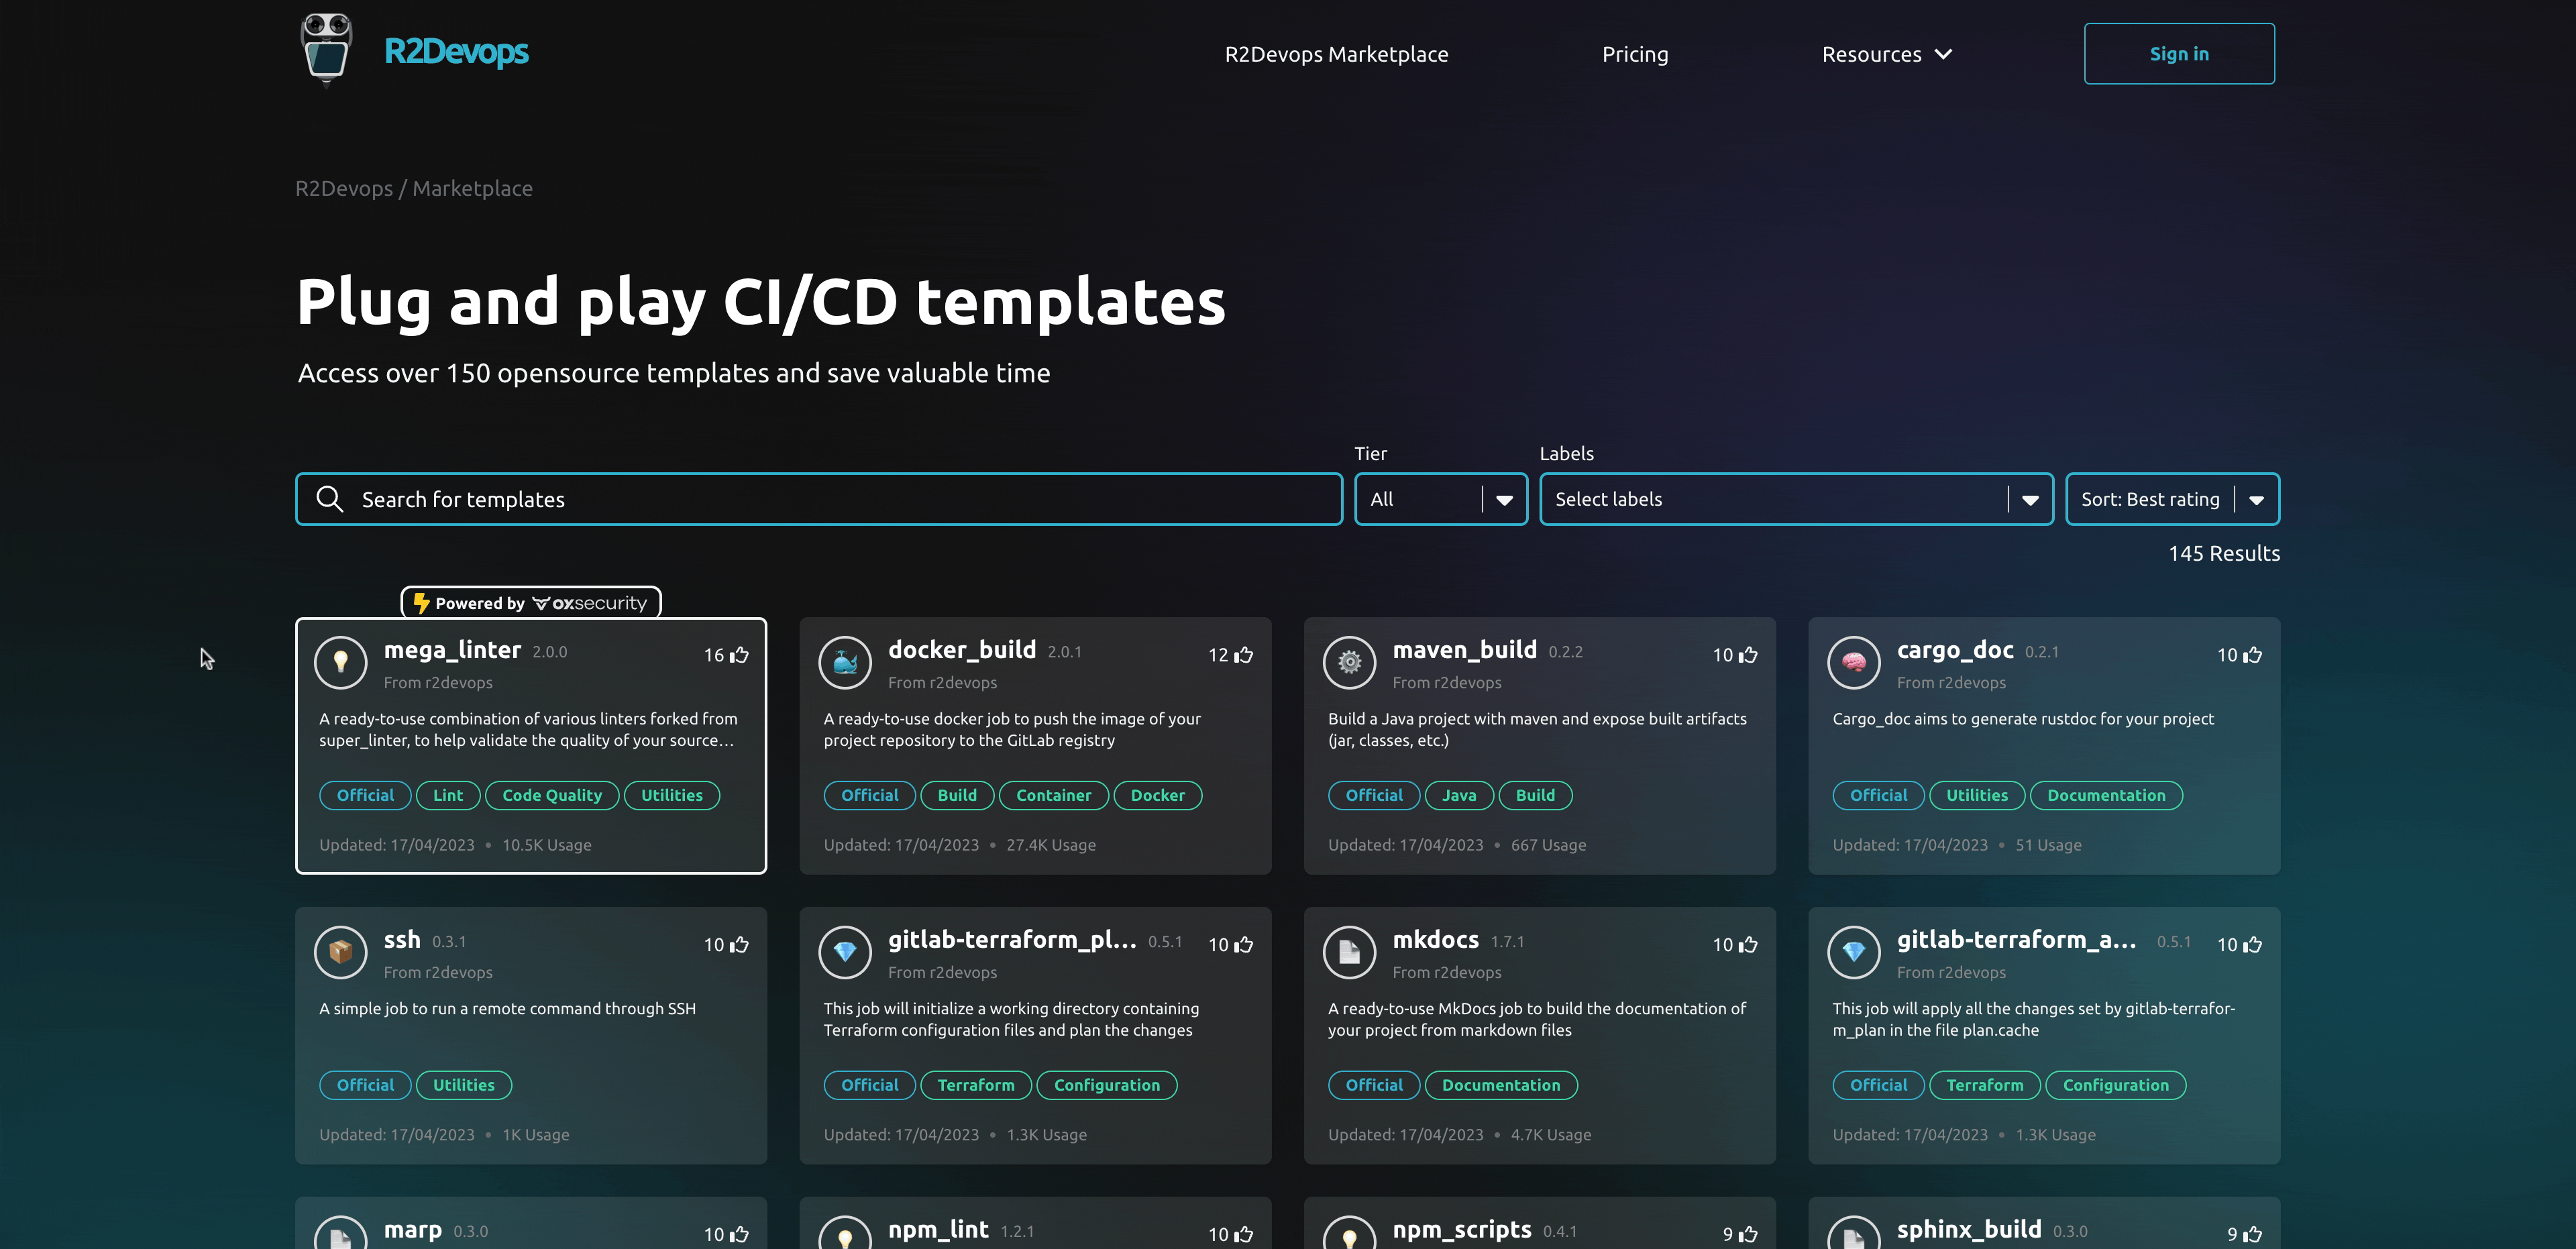 GIF of the R2Devops&#39; Marketplace